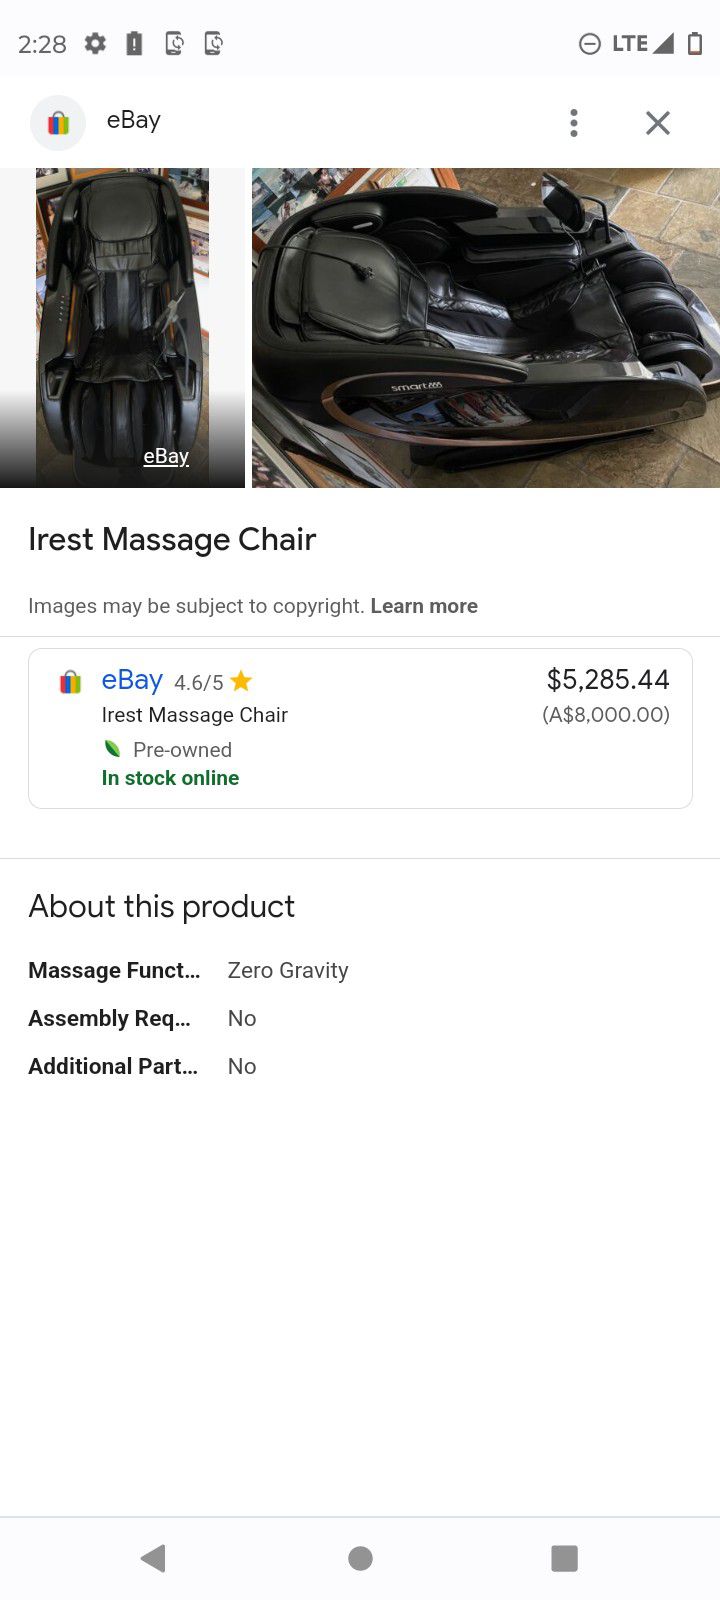 I Rest Message Chair